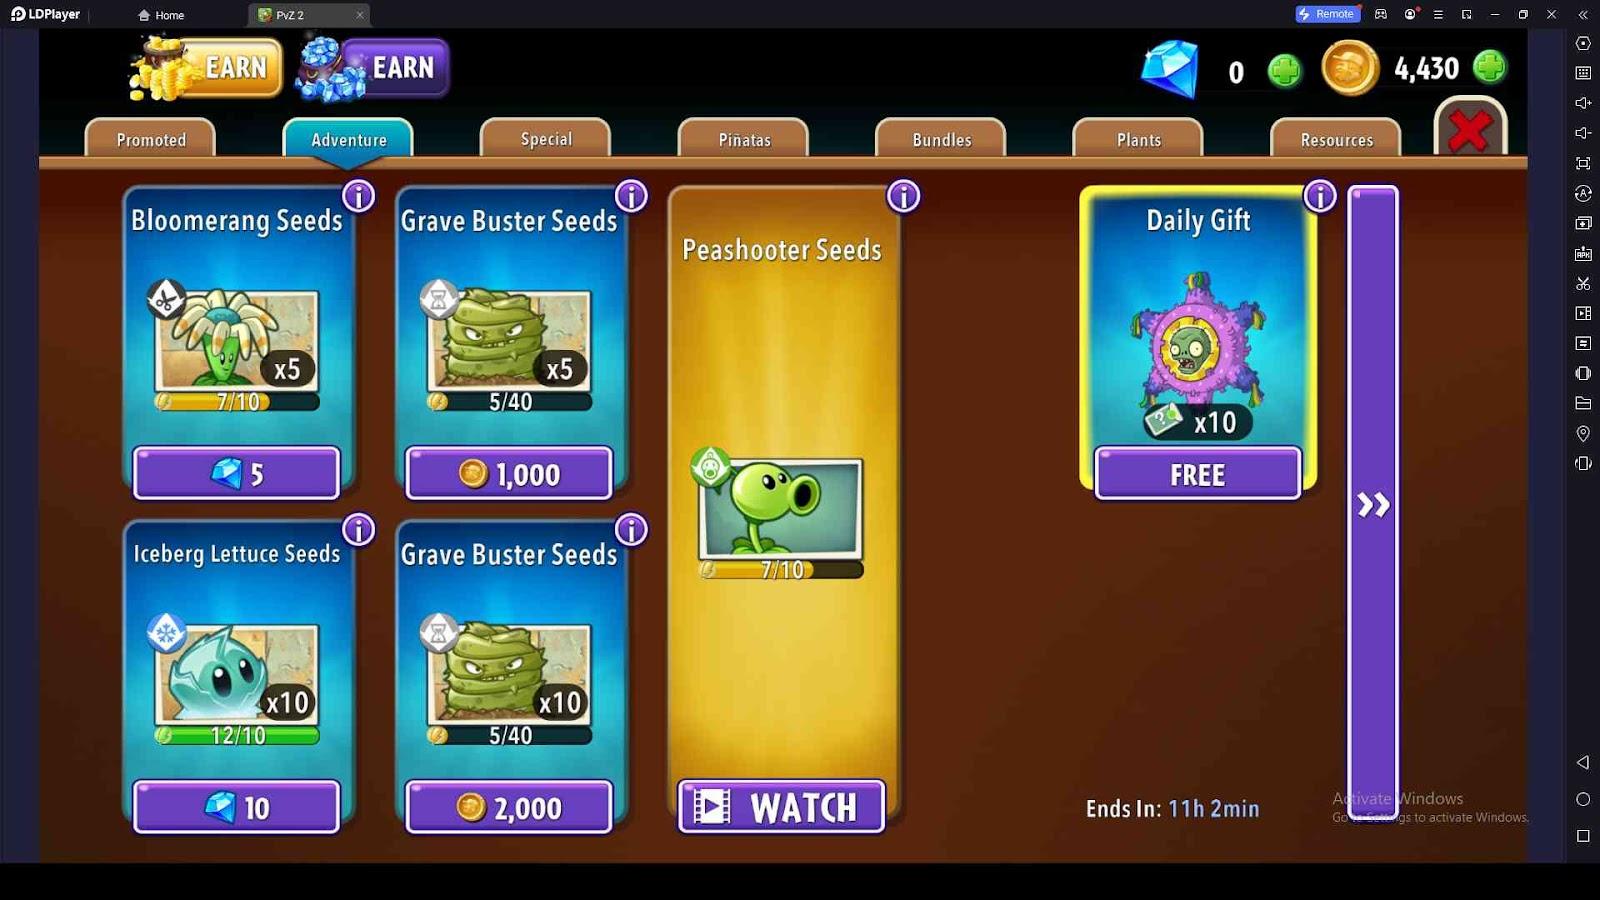 Advertisements and Offers Help You Earn More Coins and Gems